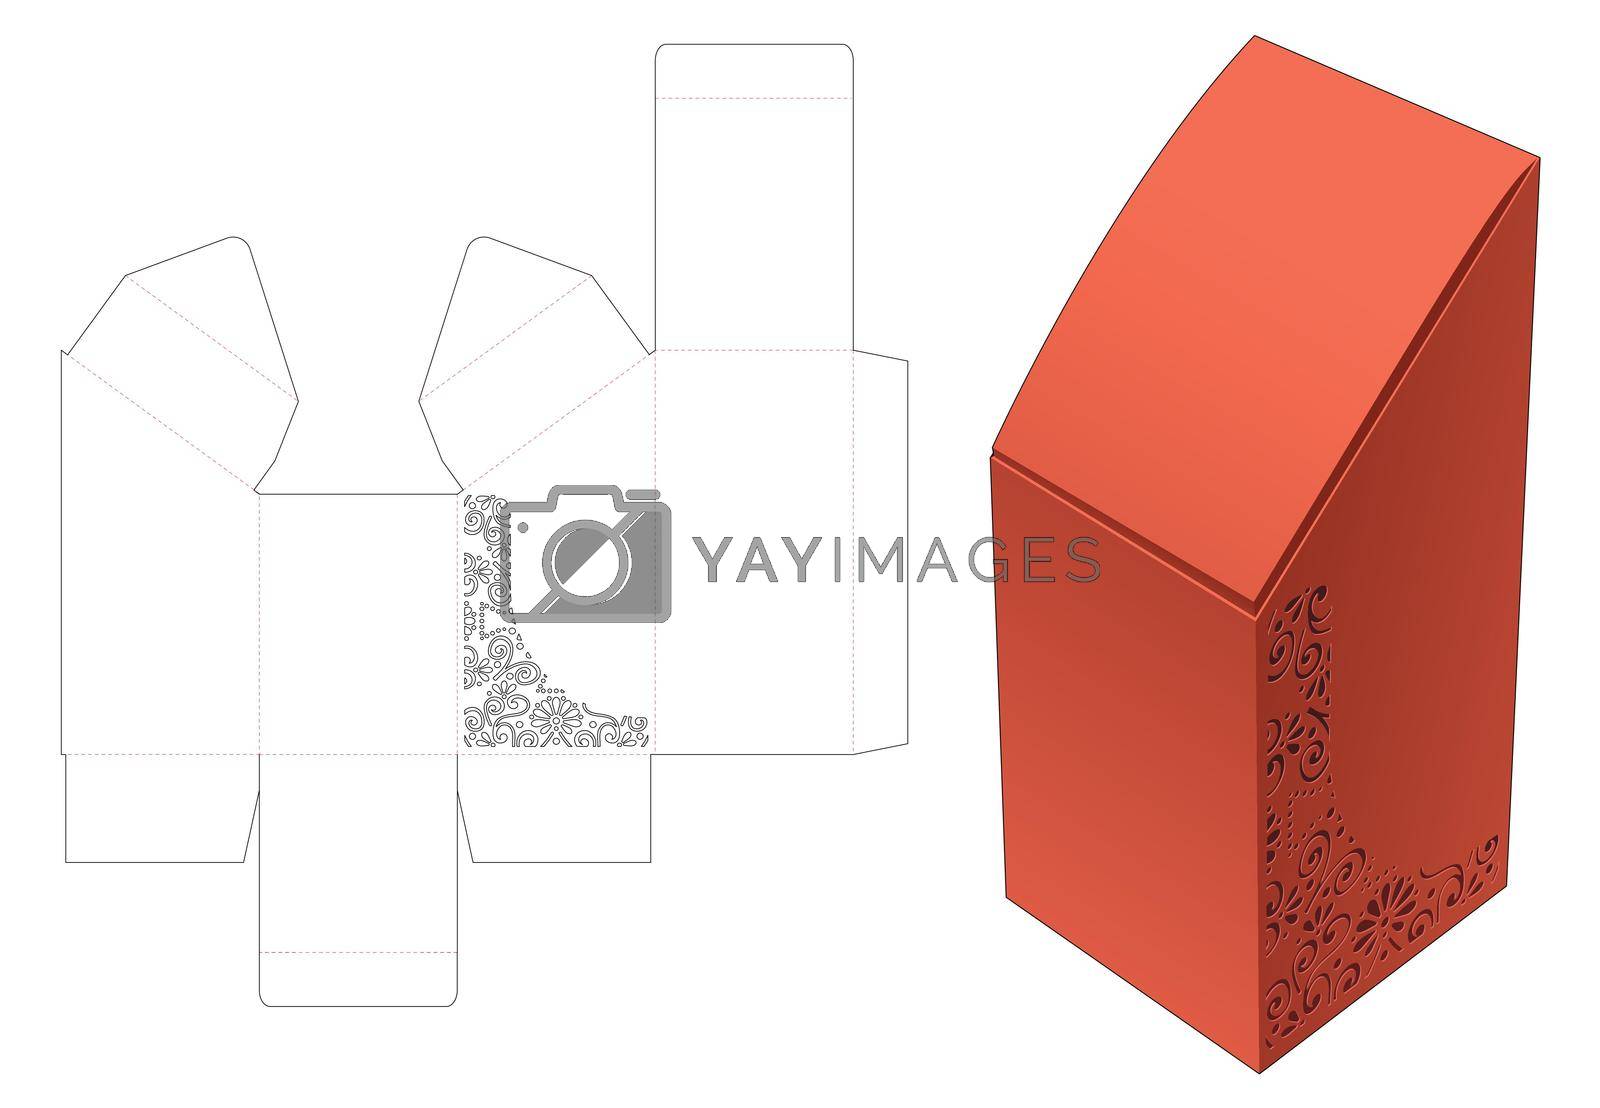 Royalty free image of Stenciled sloped box die cut template and 3D mockup by valueinvestor